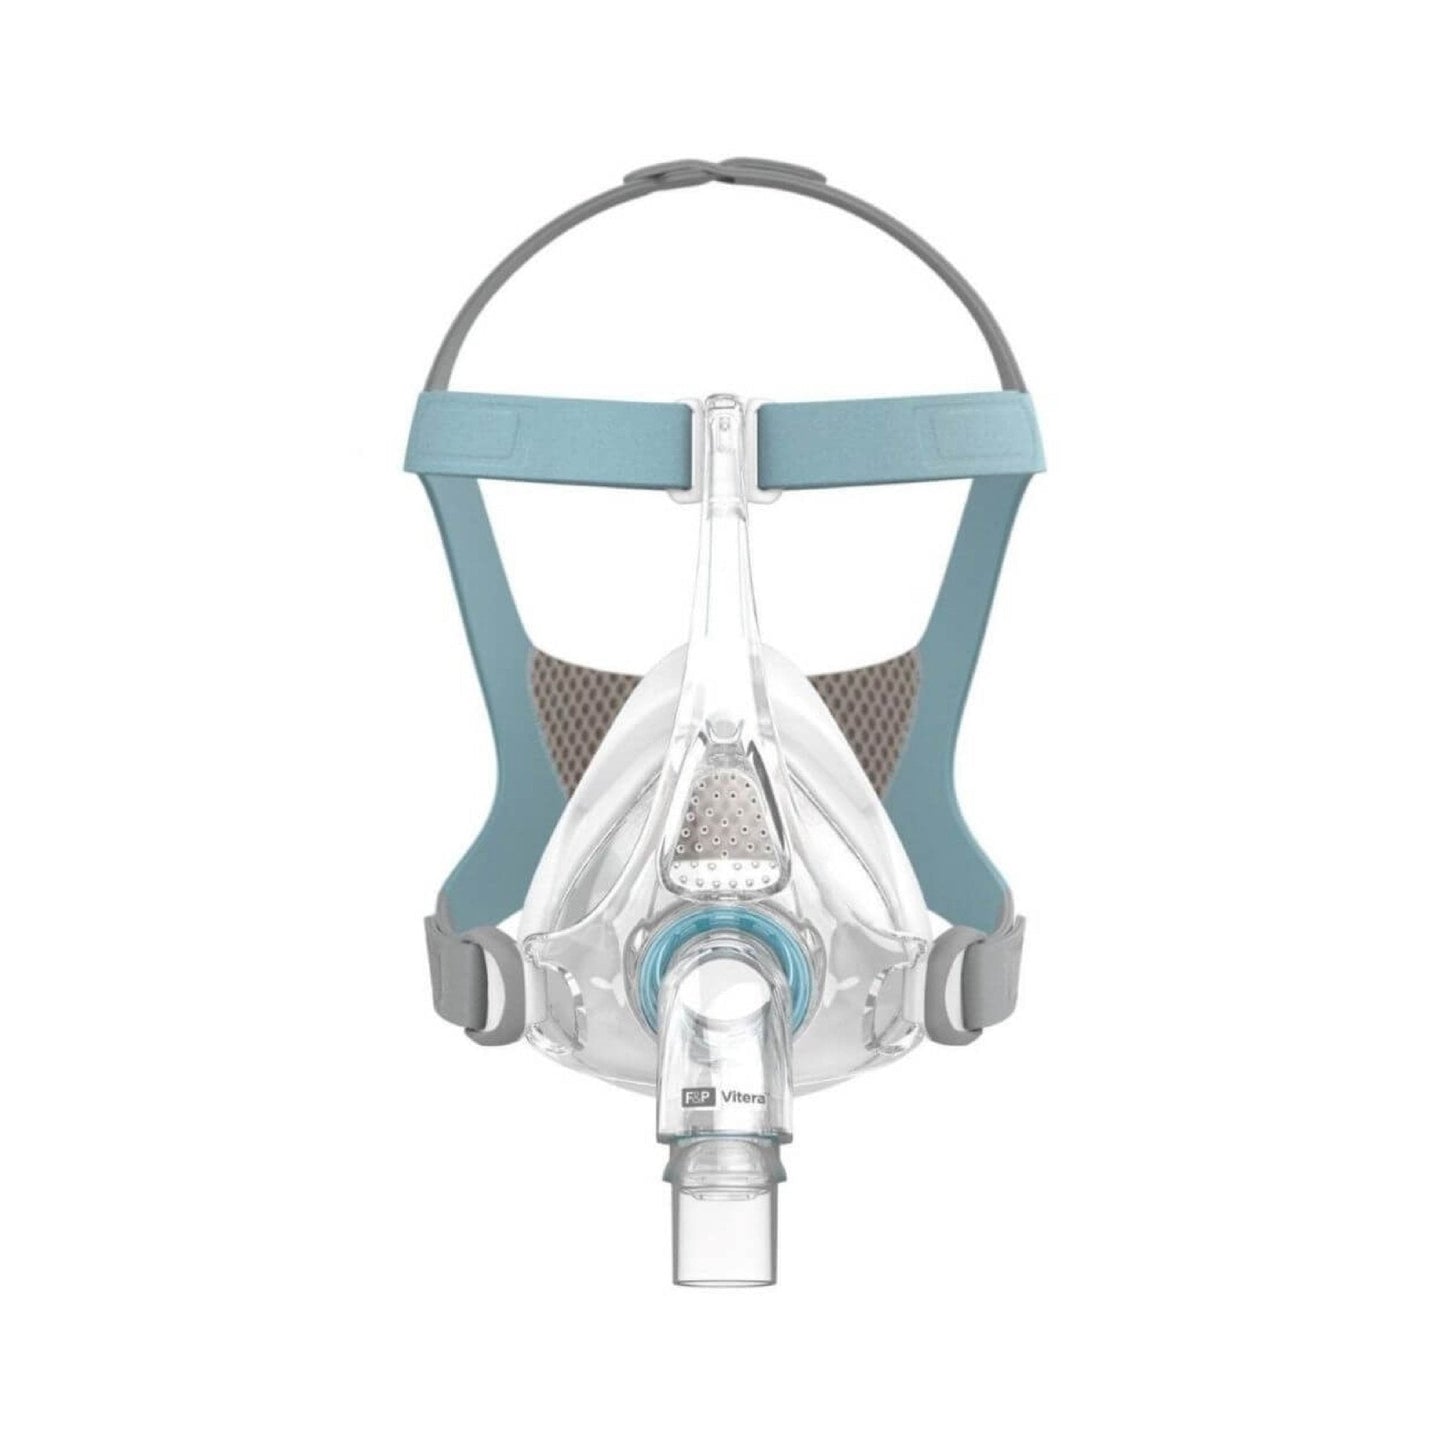 Fisher and Paykel Vitera Full Face CPAP Mask - resplabs